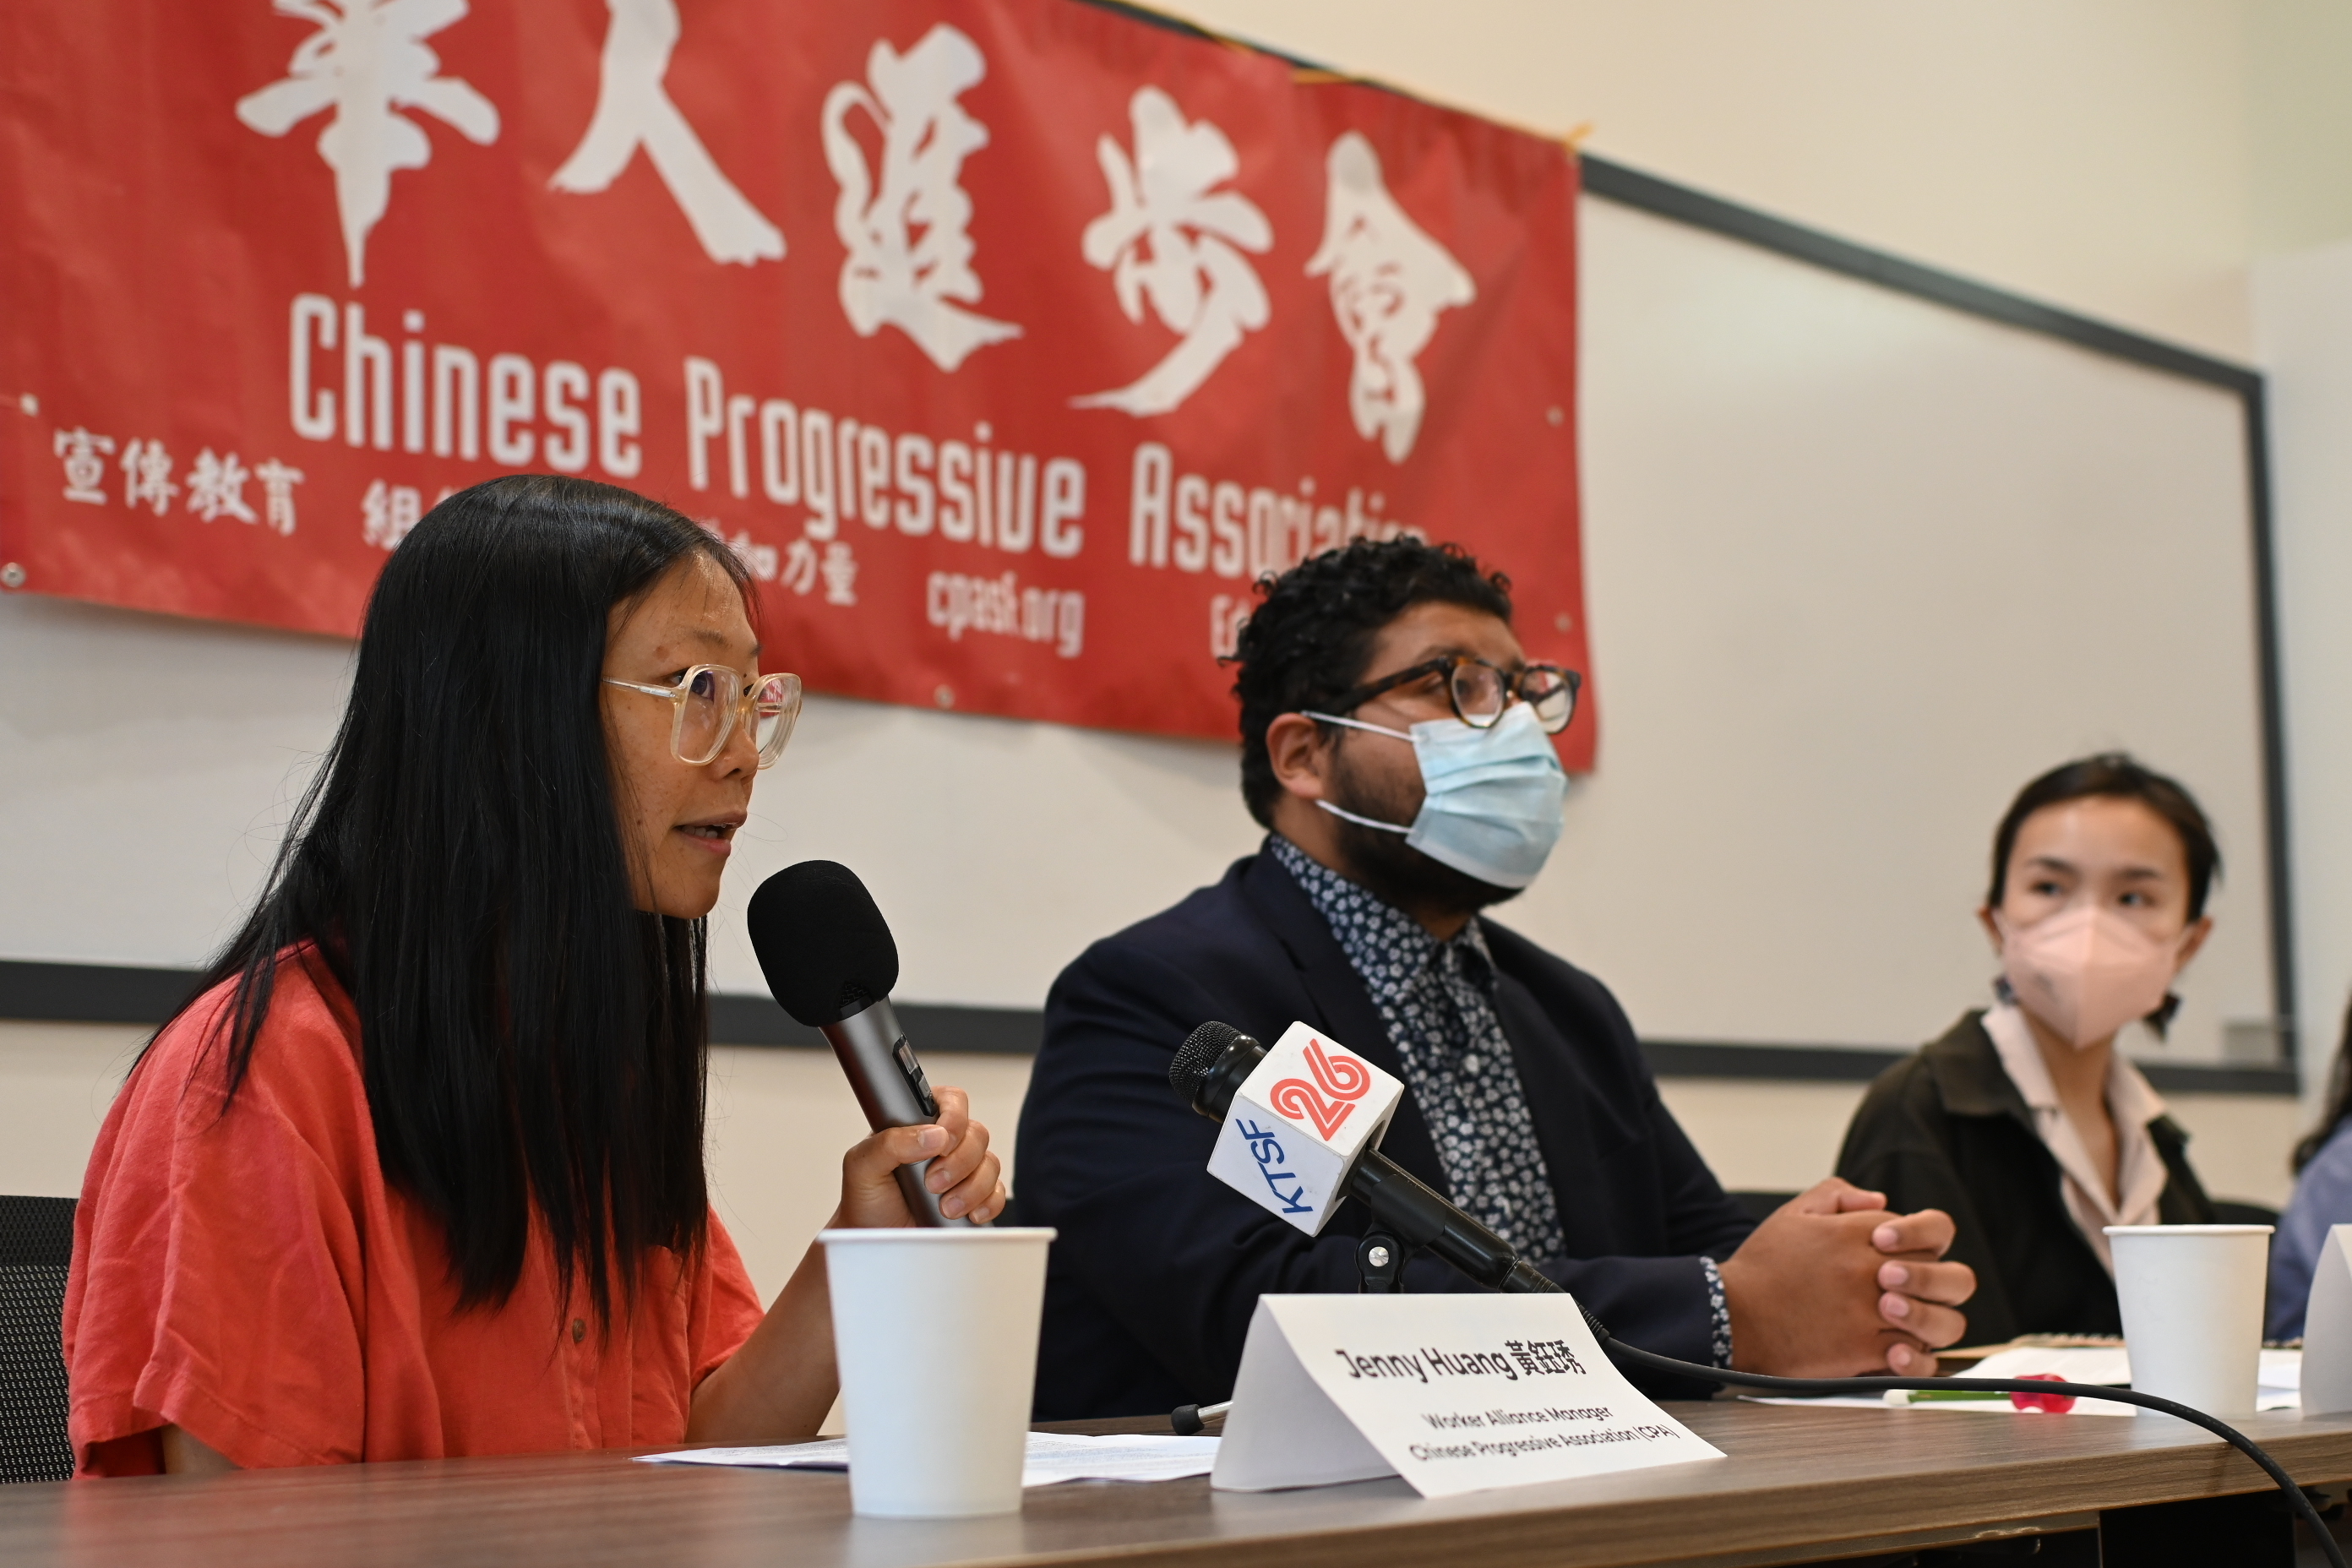 A speaker from Chinese Progressive Association speaks into a microphone in front of a table. Two other sit next to her, facing towards the audience and looking in her direction. In front of the speaker is another microphone from TV outlet KTSF 26. Behind the three people sitting at the table is a large banner that says 'Chinese Progressive Association' in Chinese and English.